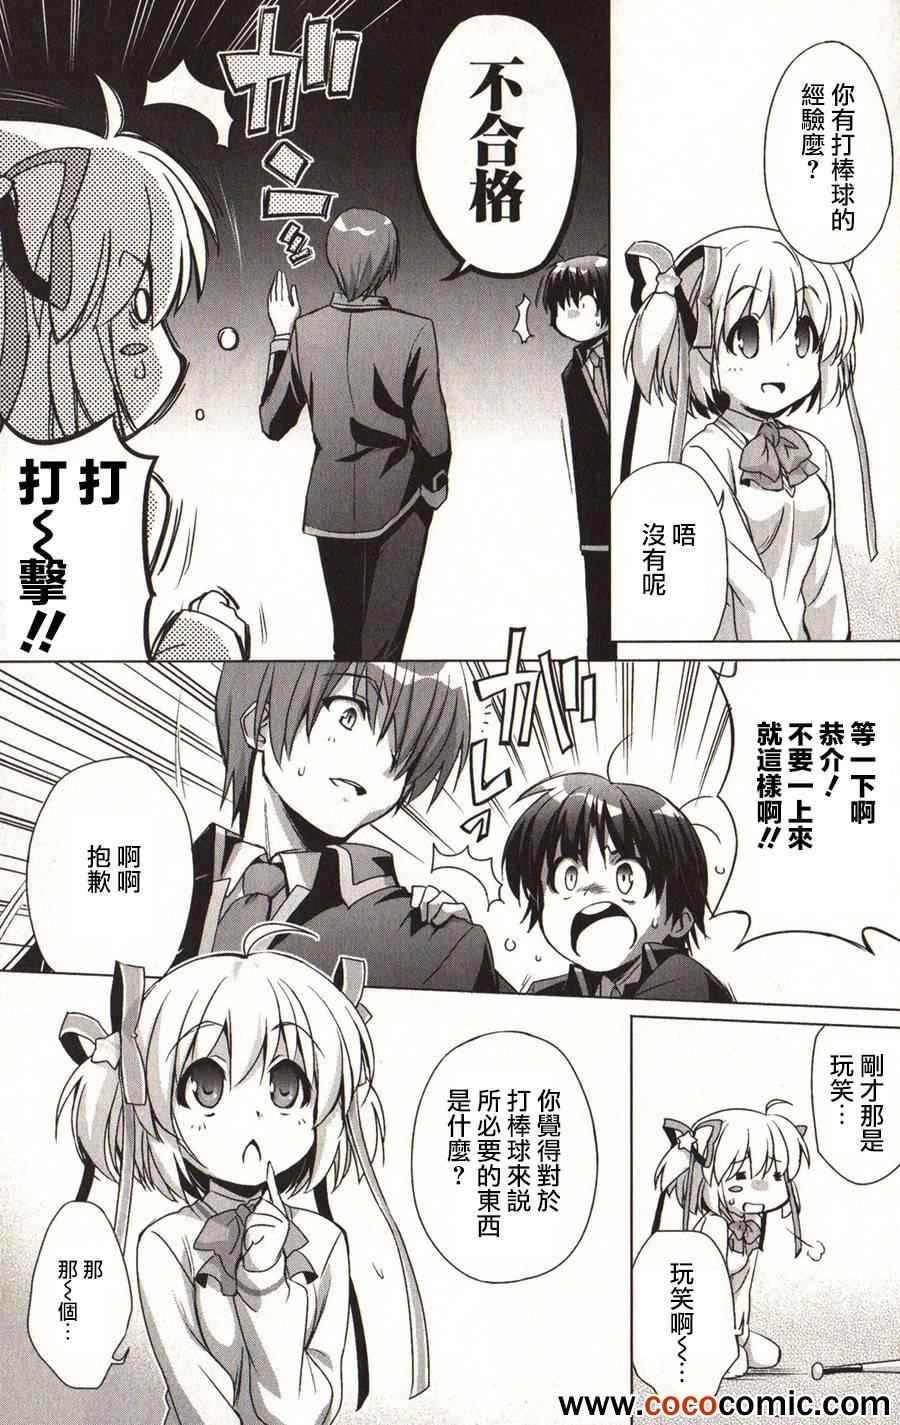 《Little Busters! End of Refrain》漫画 End of Refrain 003集